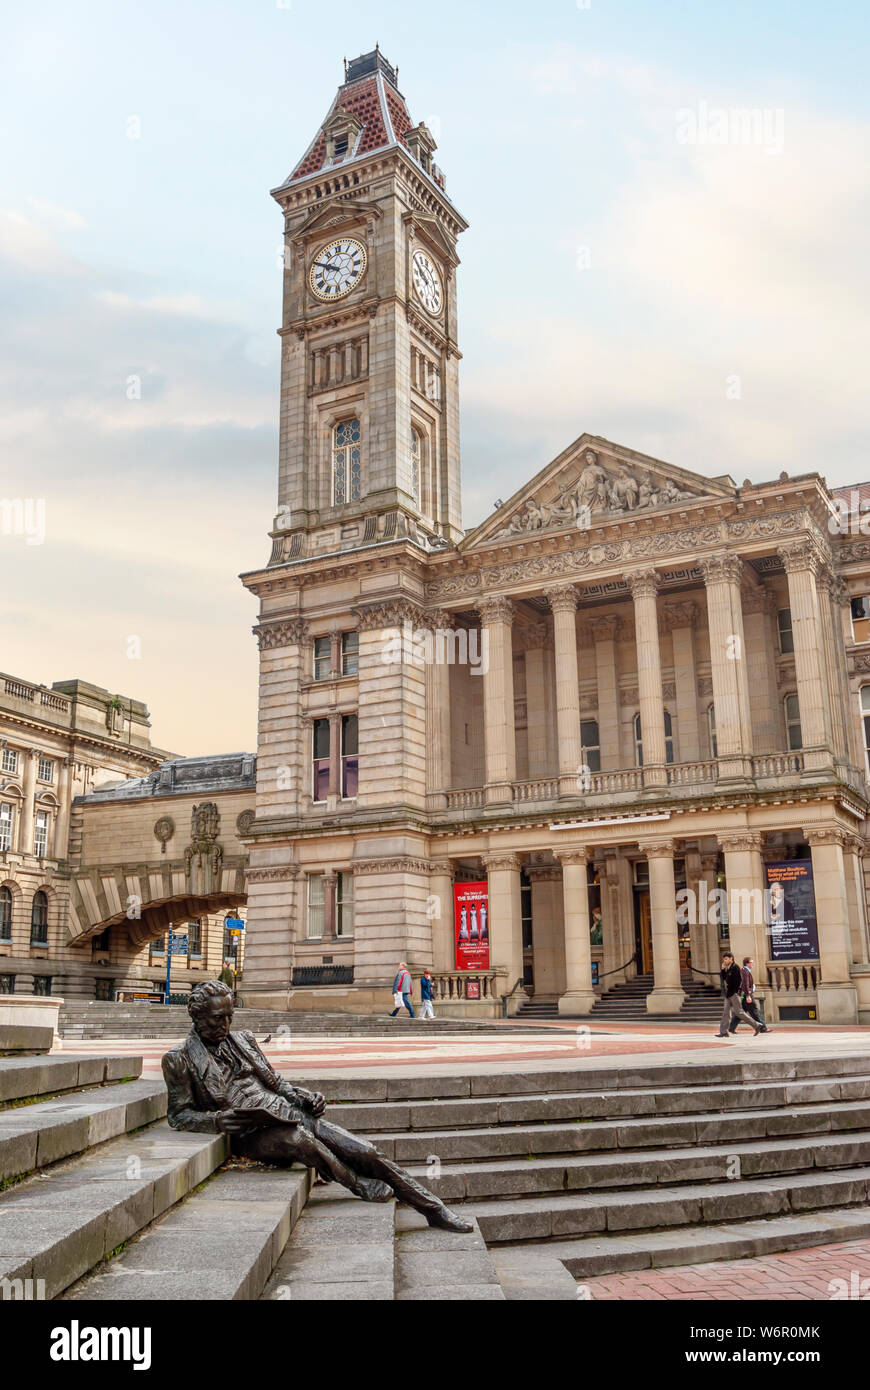 Thomas Attwood Statue in front of Birmingham Museum & Art Gallery at Chamberlain Square, Birmingham, England Stock Photo